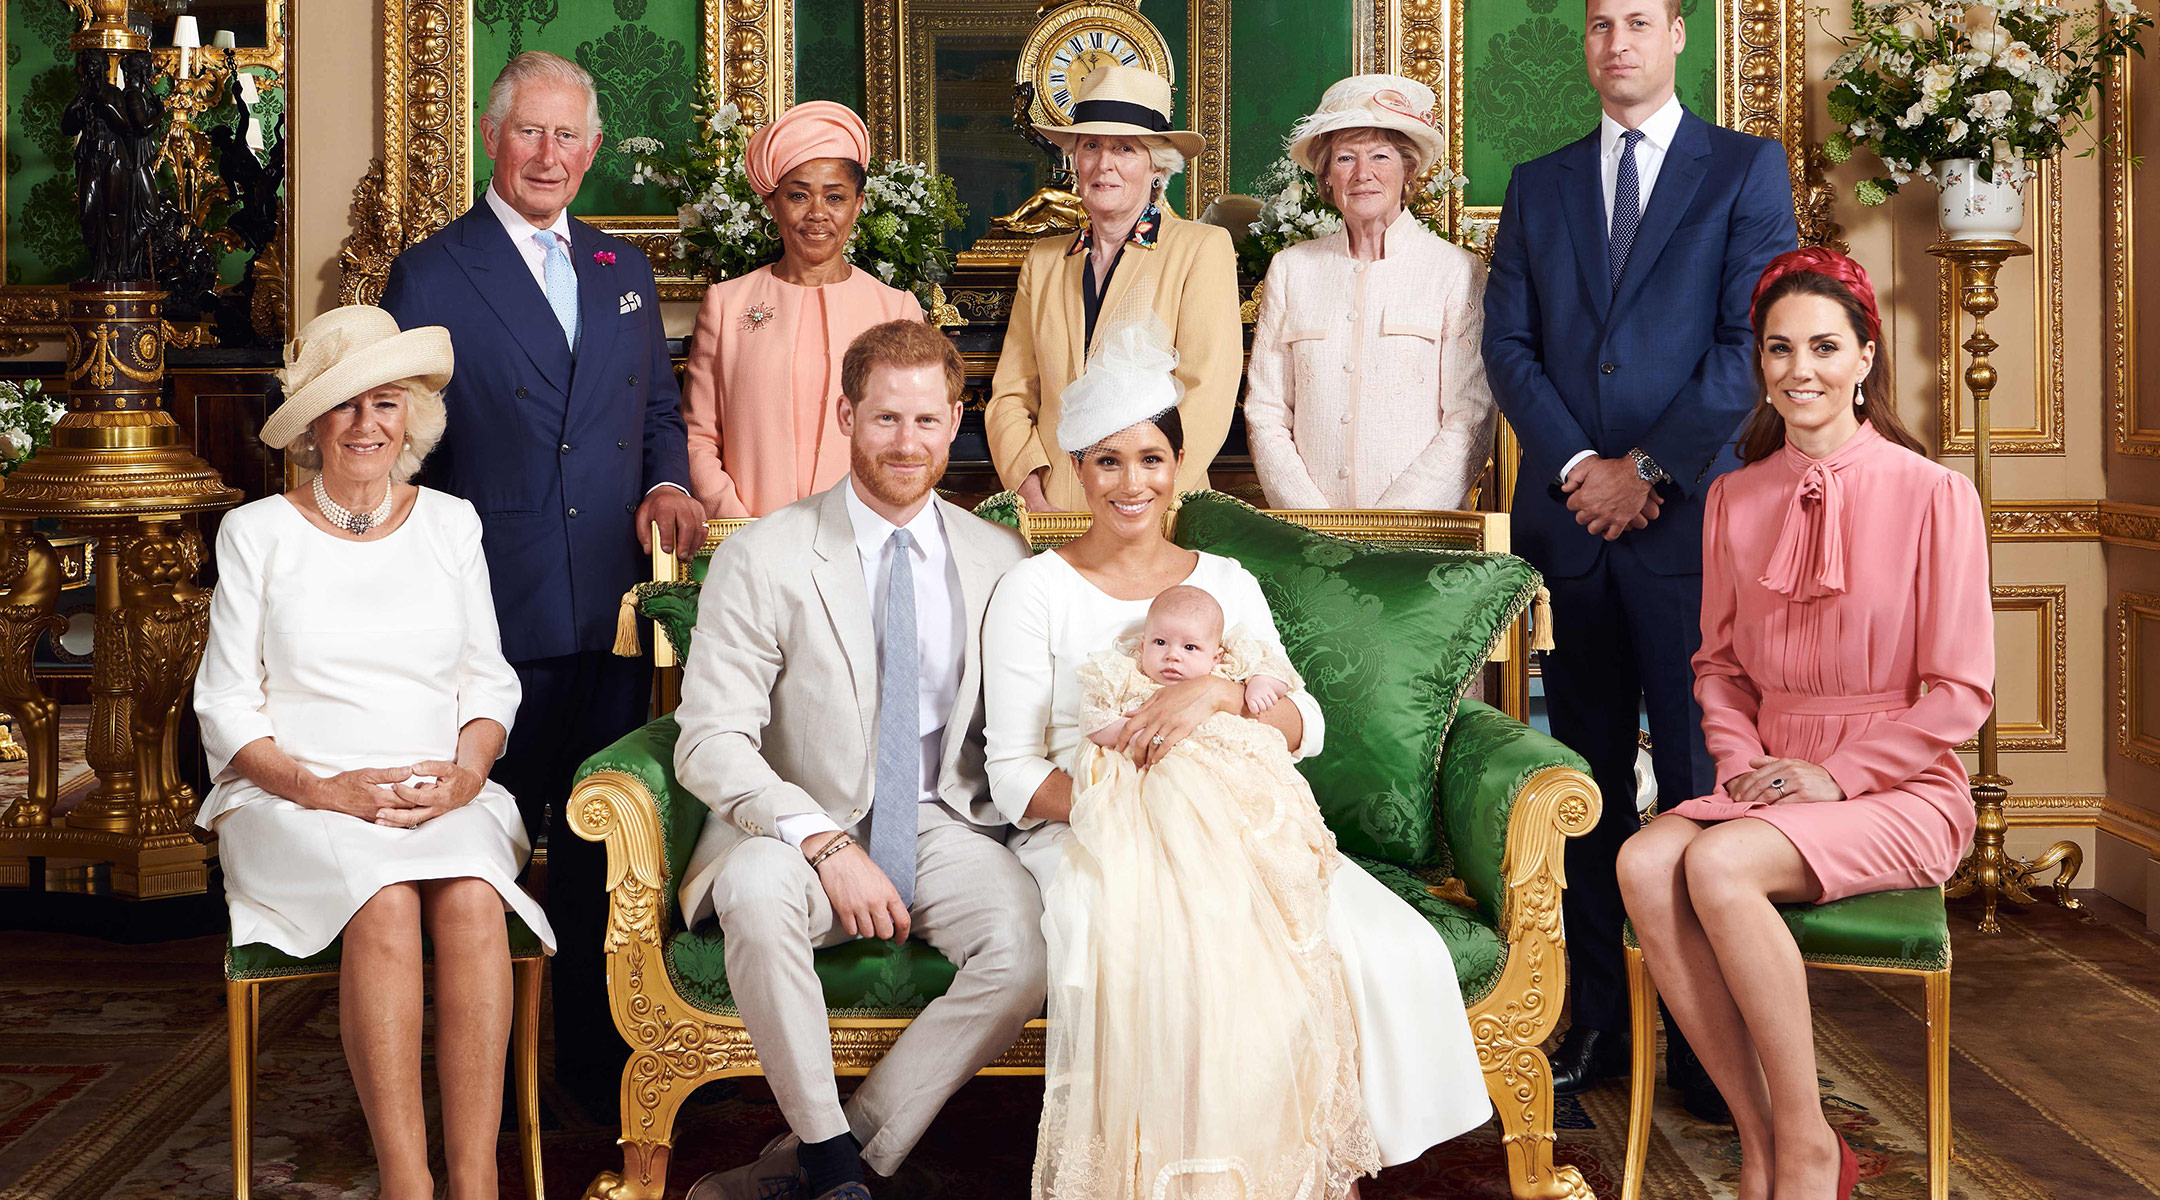 royal family poses for baby Archie's christening 